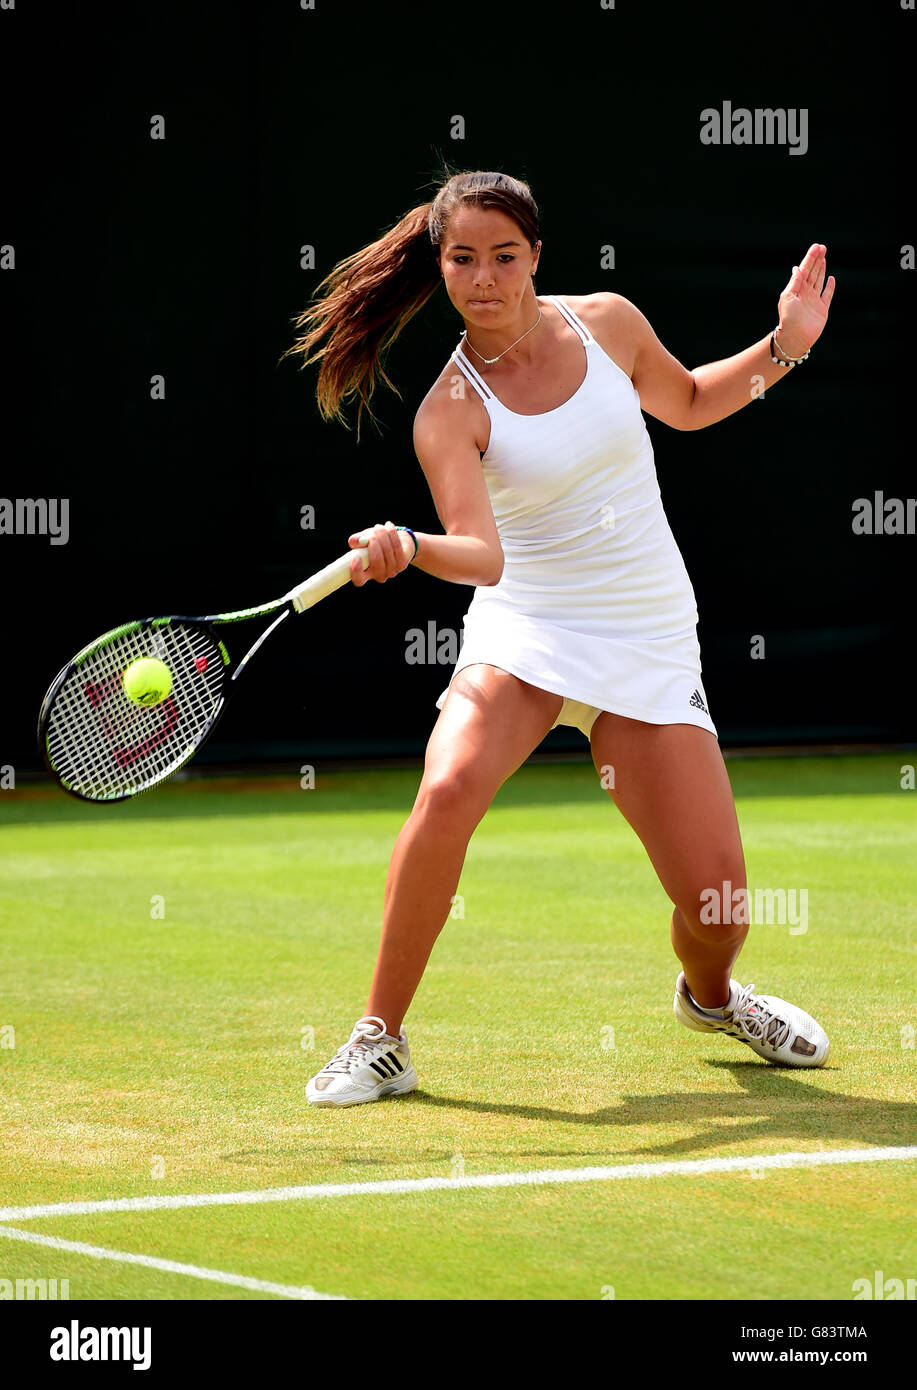 Jodie Anna Burrage competes in the girls singles on day Seven of the Wimbledon Championships at the All England Lawn Tennis and Croquet Club, Wimbledon. Stock Photo